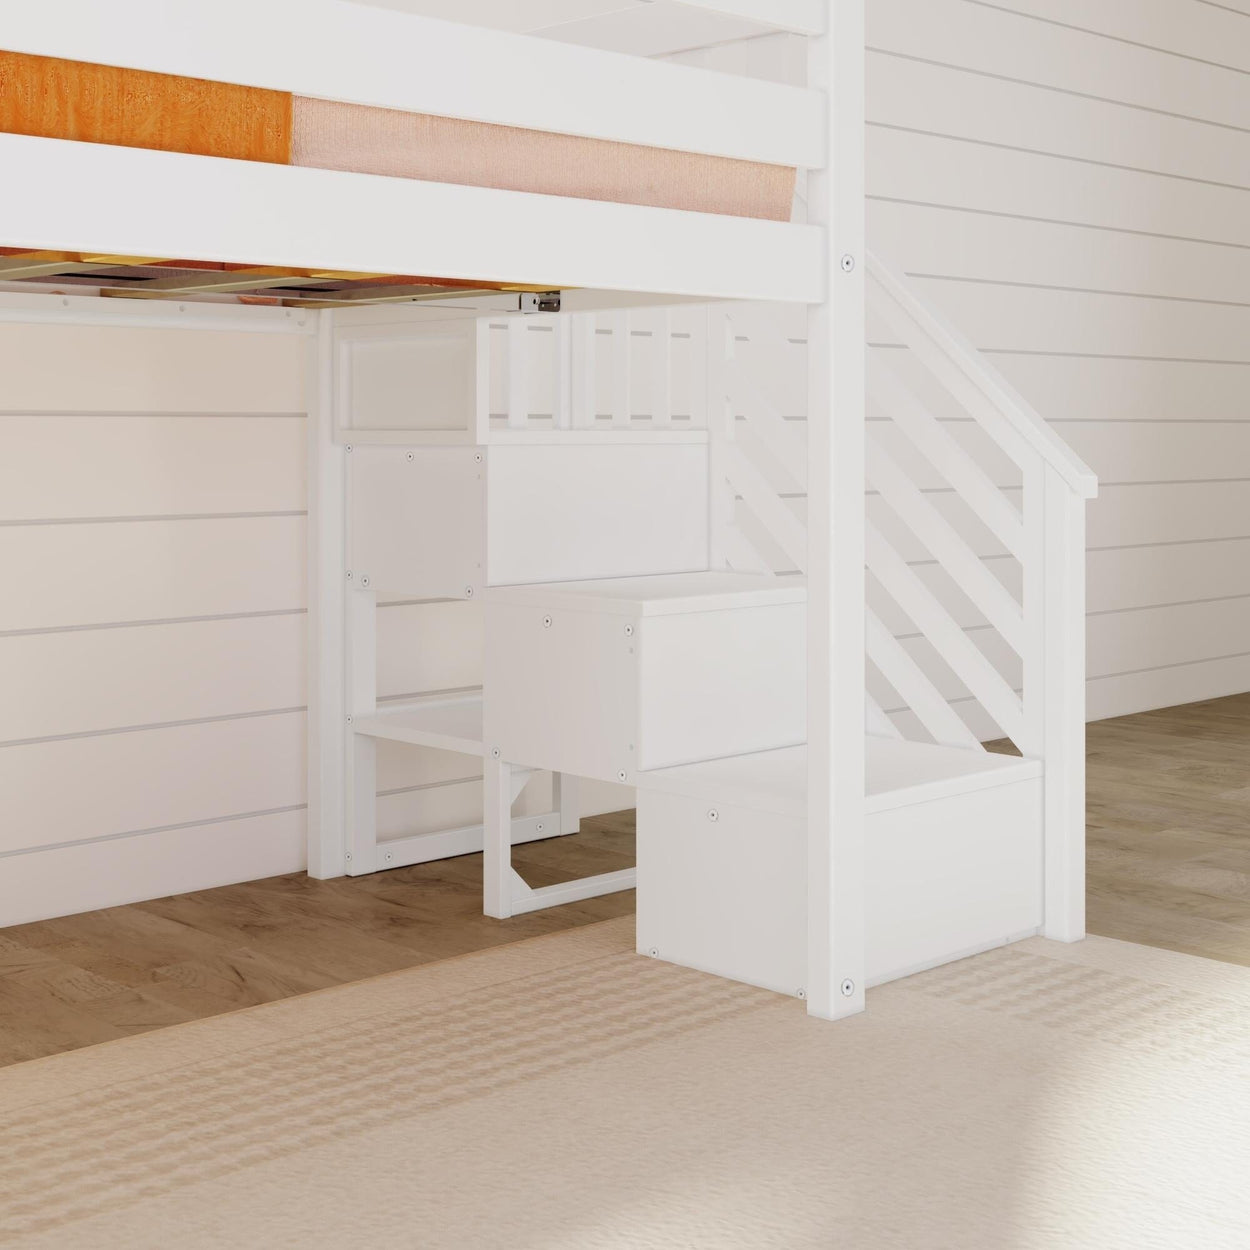 180425-002 : Loft Beds Classic Twin Low Loft with Stairs and Easy Slide, White